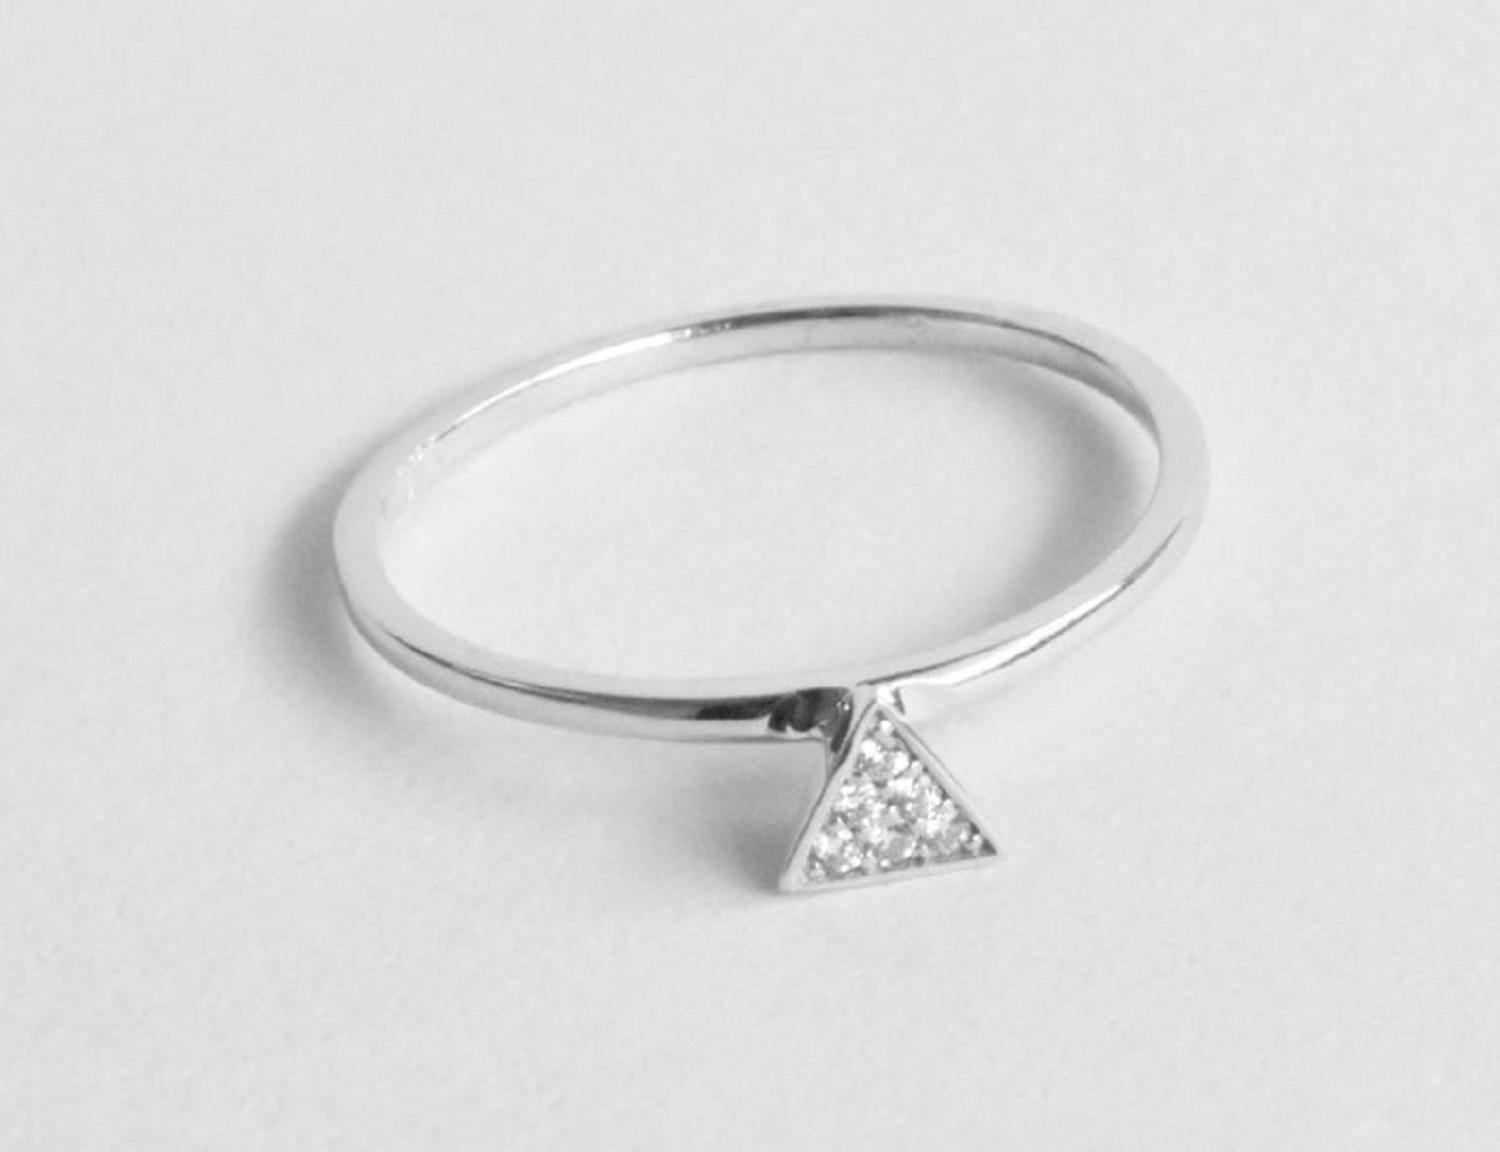 For Sale:  14k Gold Triangle Stacking Ring with White Pave Diamonds Minimalist Ring 4